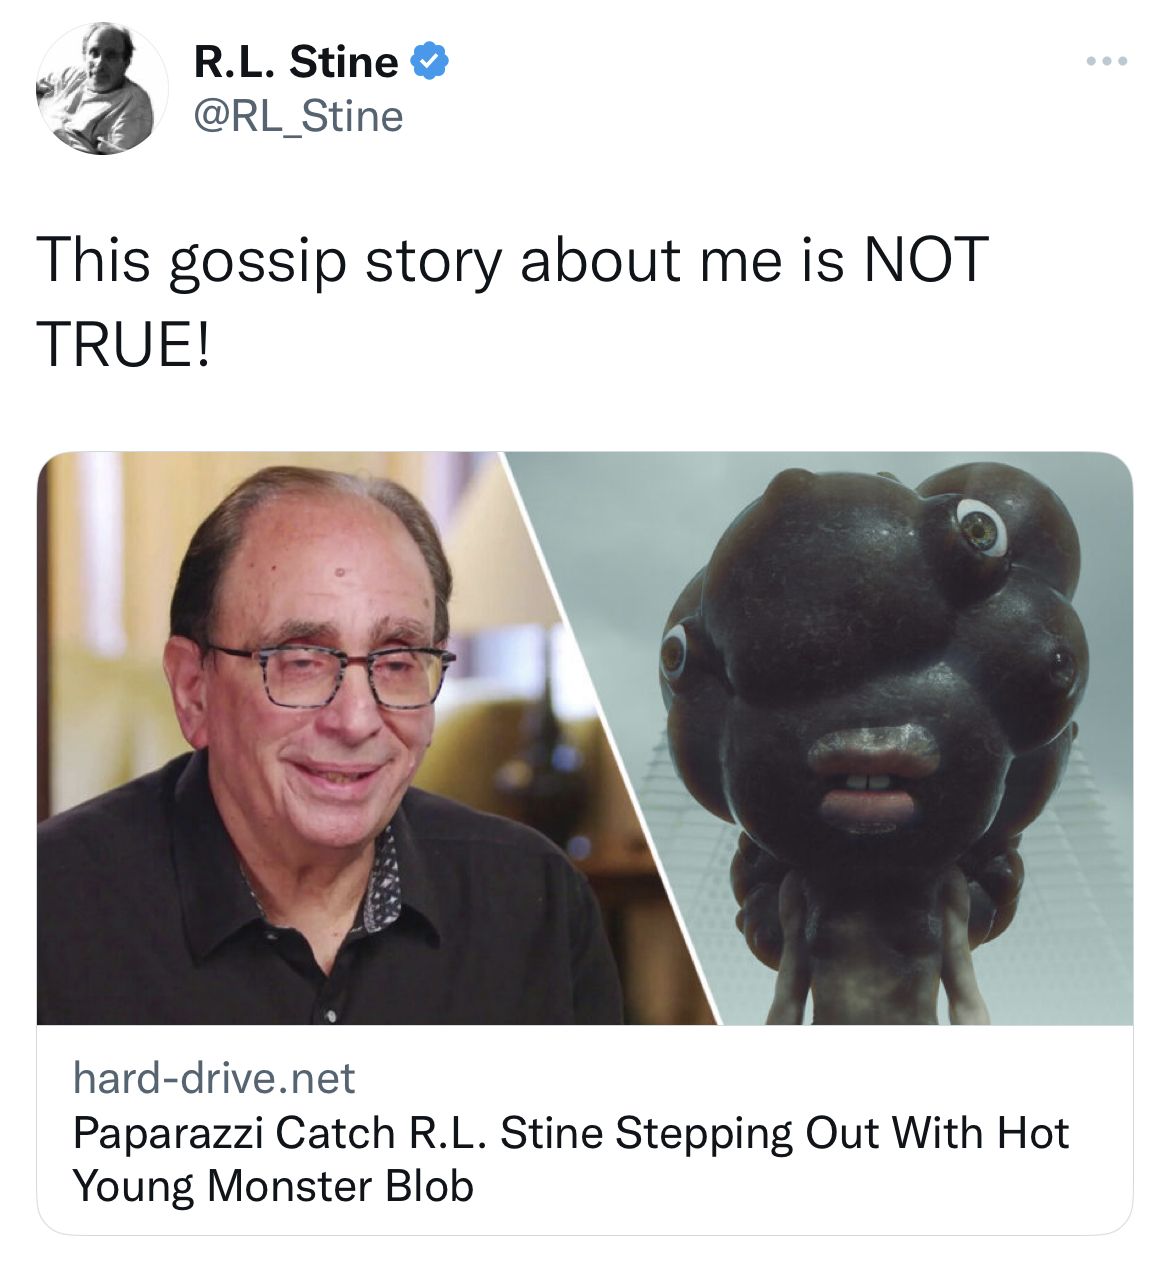 savage and absurd tweets - human behavior - R.L. Stine This gossip story about me is Not True! harddrive.net Paparazzi Catch R.L. Stine Stepping Out With Hot Young Monster Blob